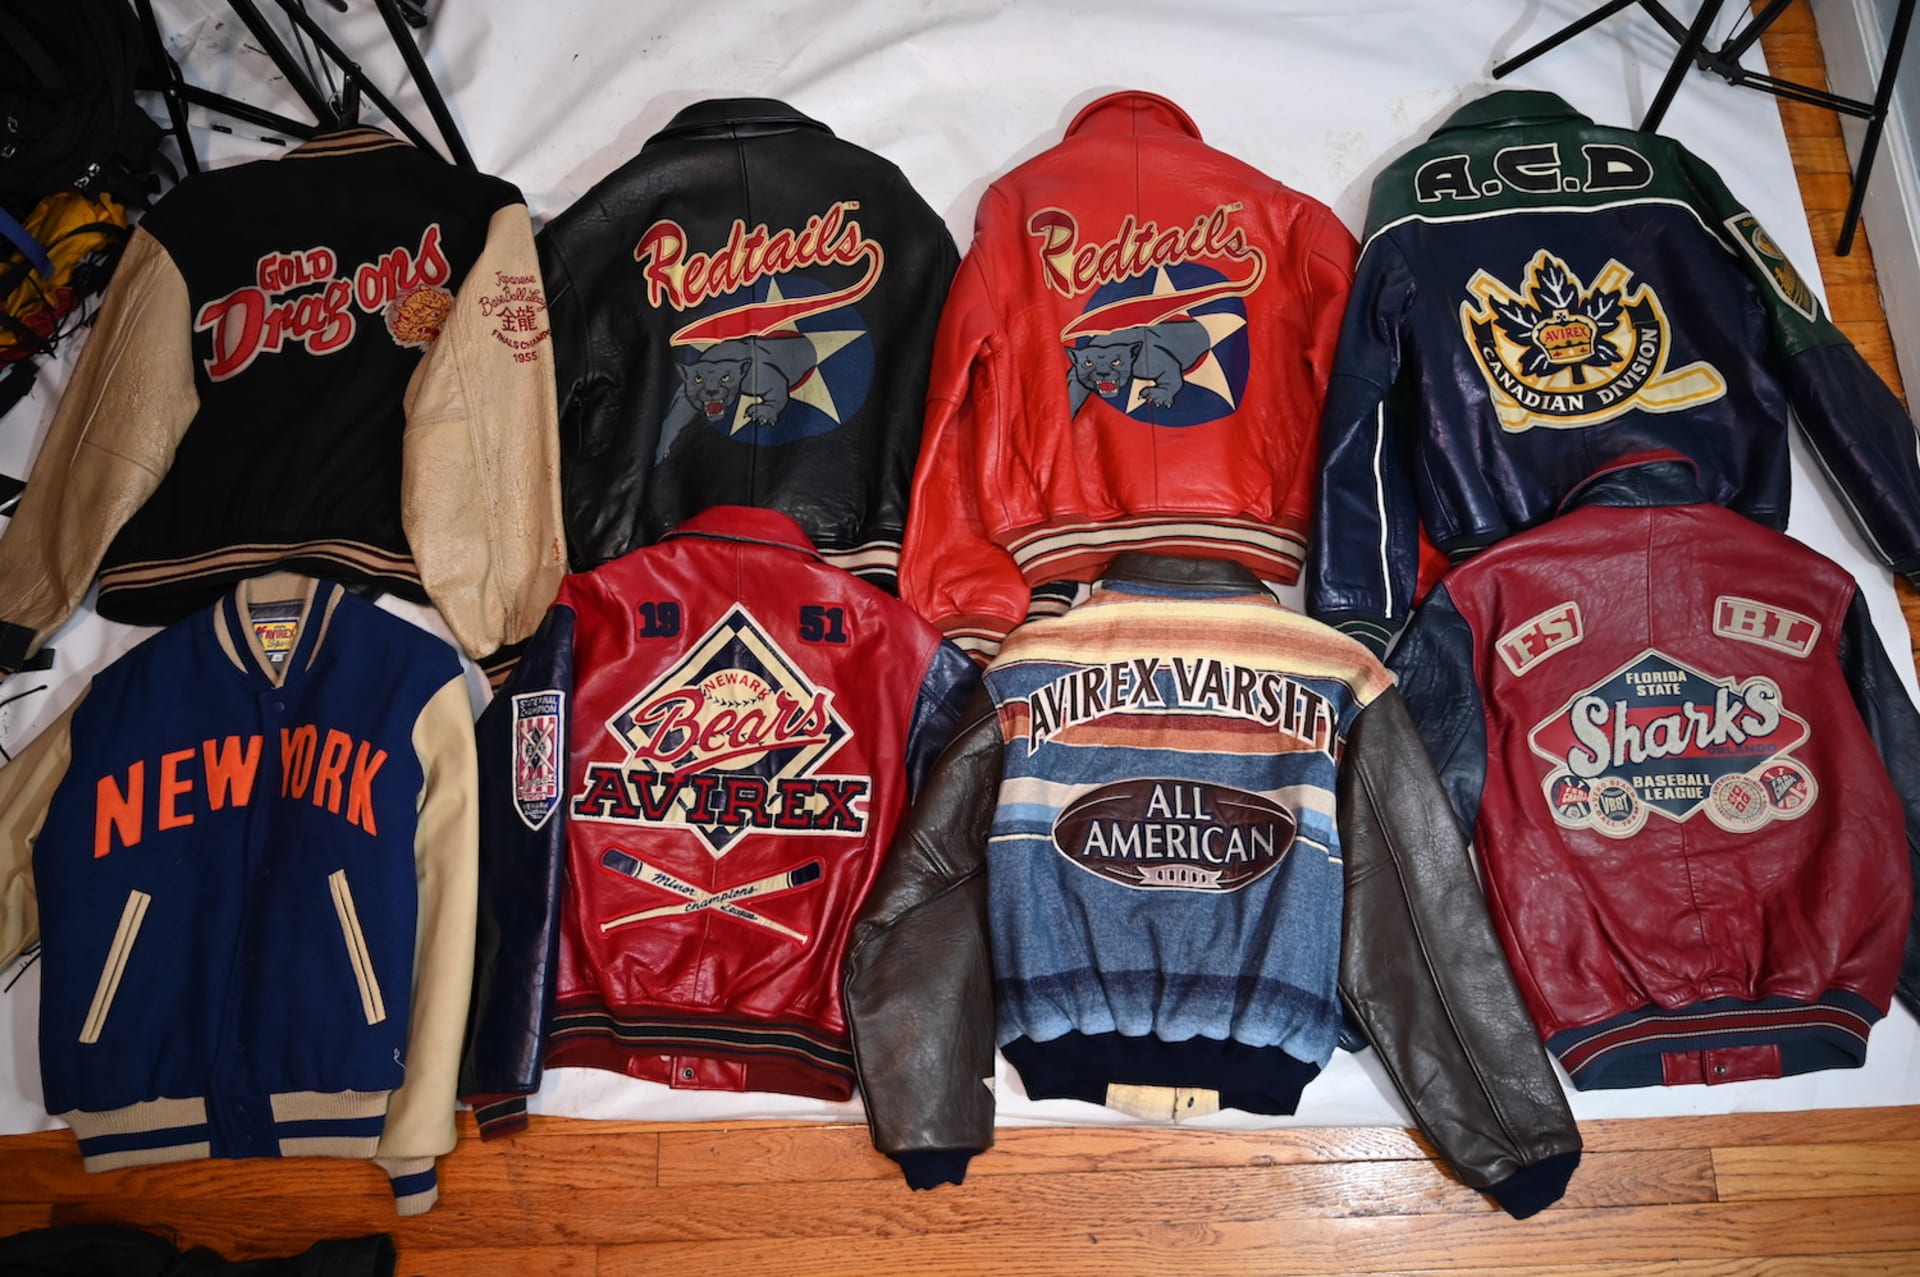 How Hip Hop Popularized Leather Jackets in Fashion